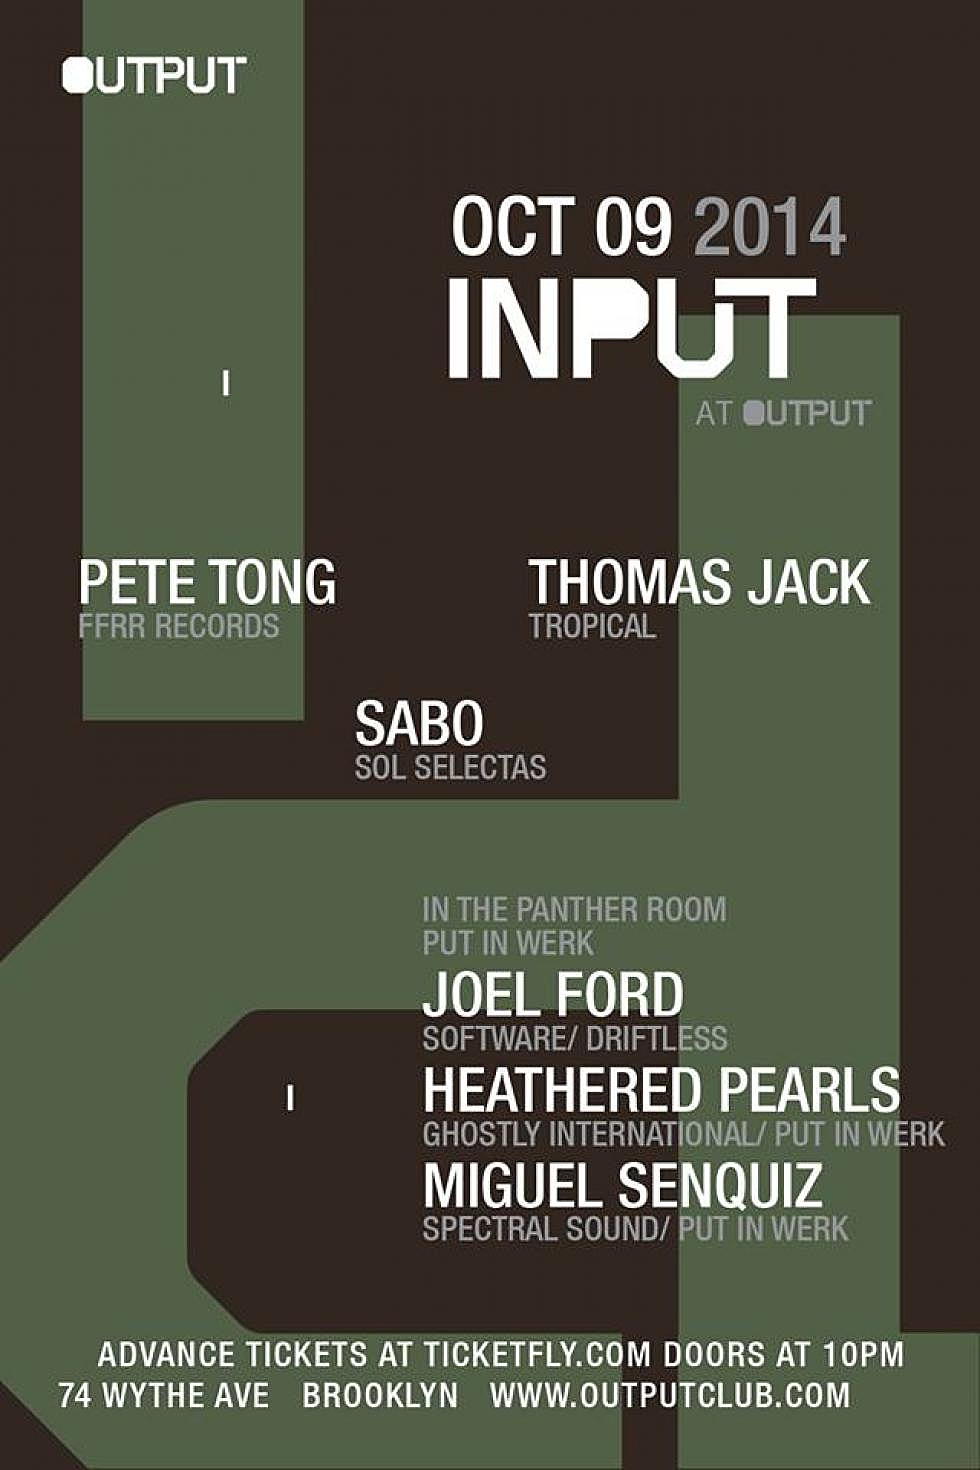 Contest: Win a pair of tickets to Pete Tong @ Output, Brooklyn, 10/9!